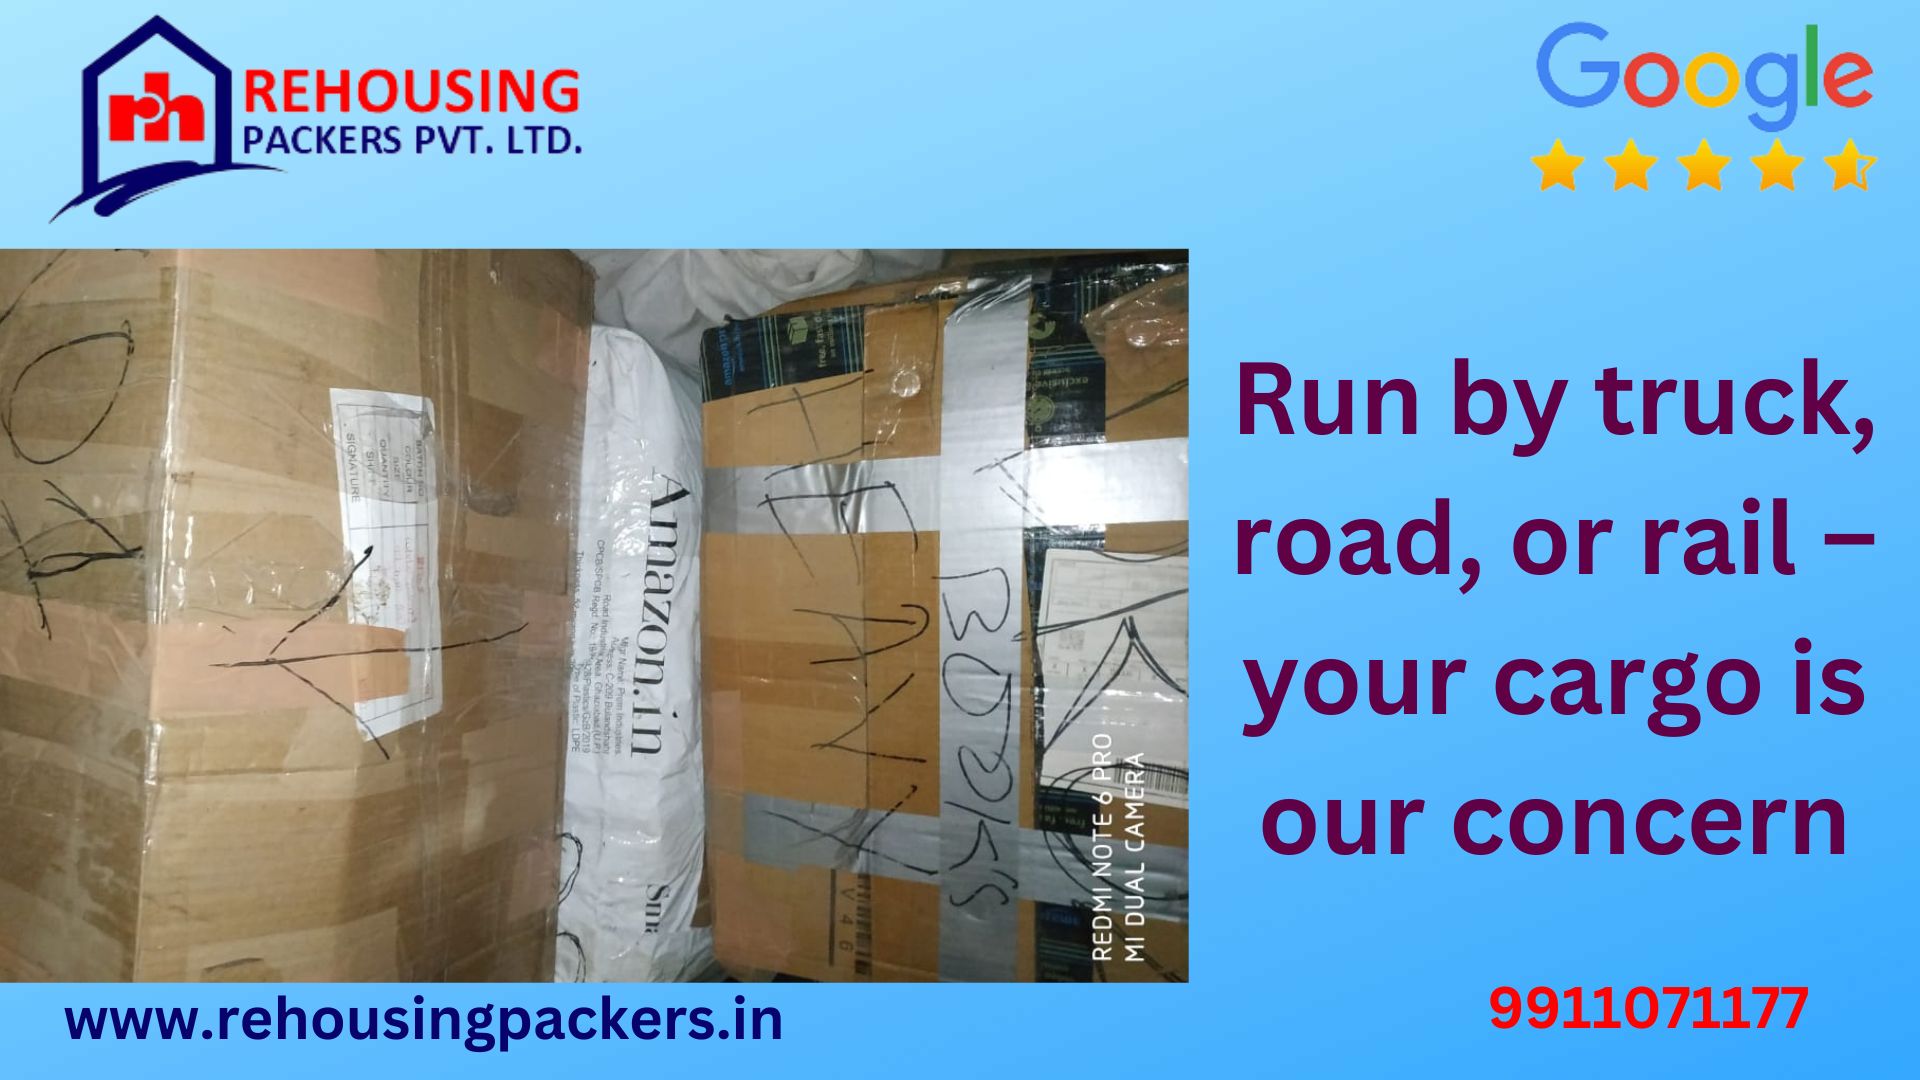 Packers and Movers from Bhubaneswar to Mumbai